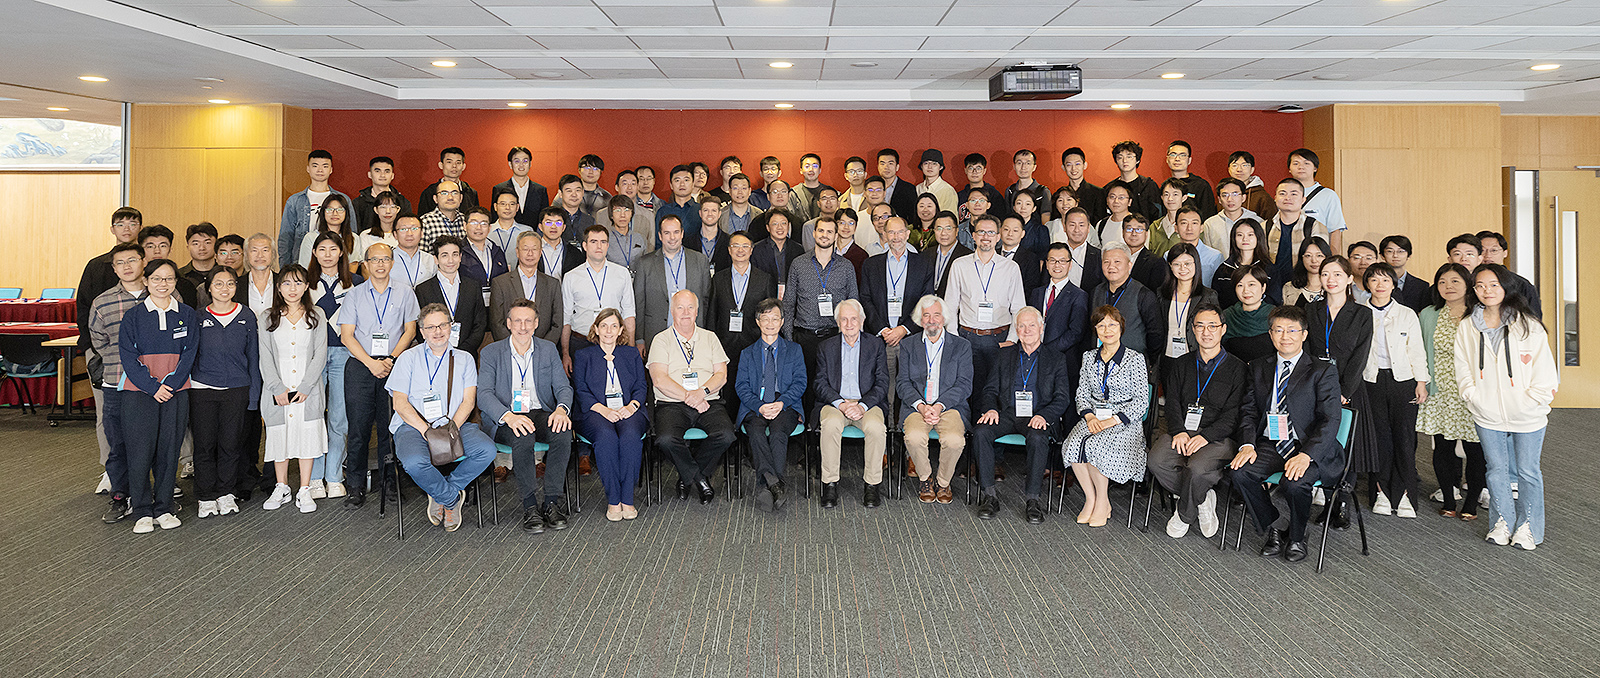 Professor Chen Fu-rong (5th from left, front row) and speakers with attendees.